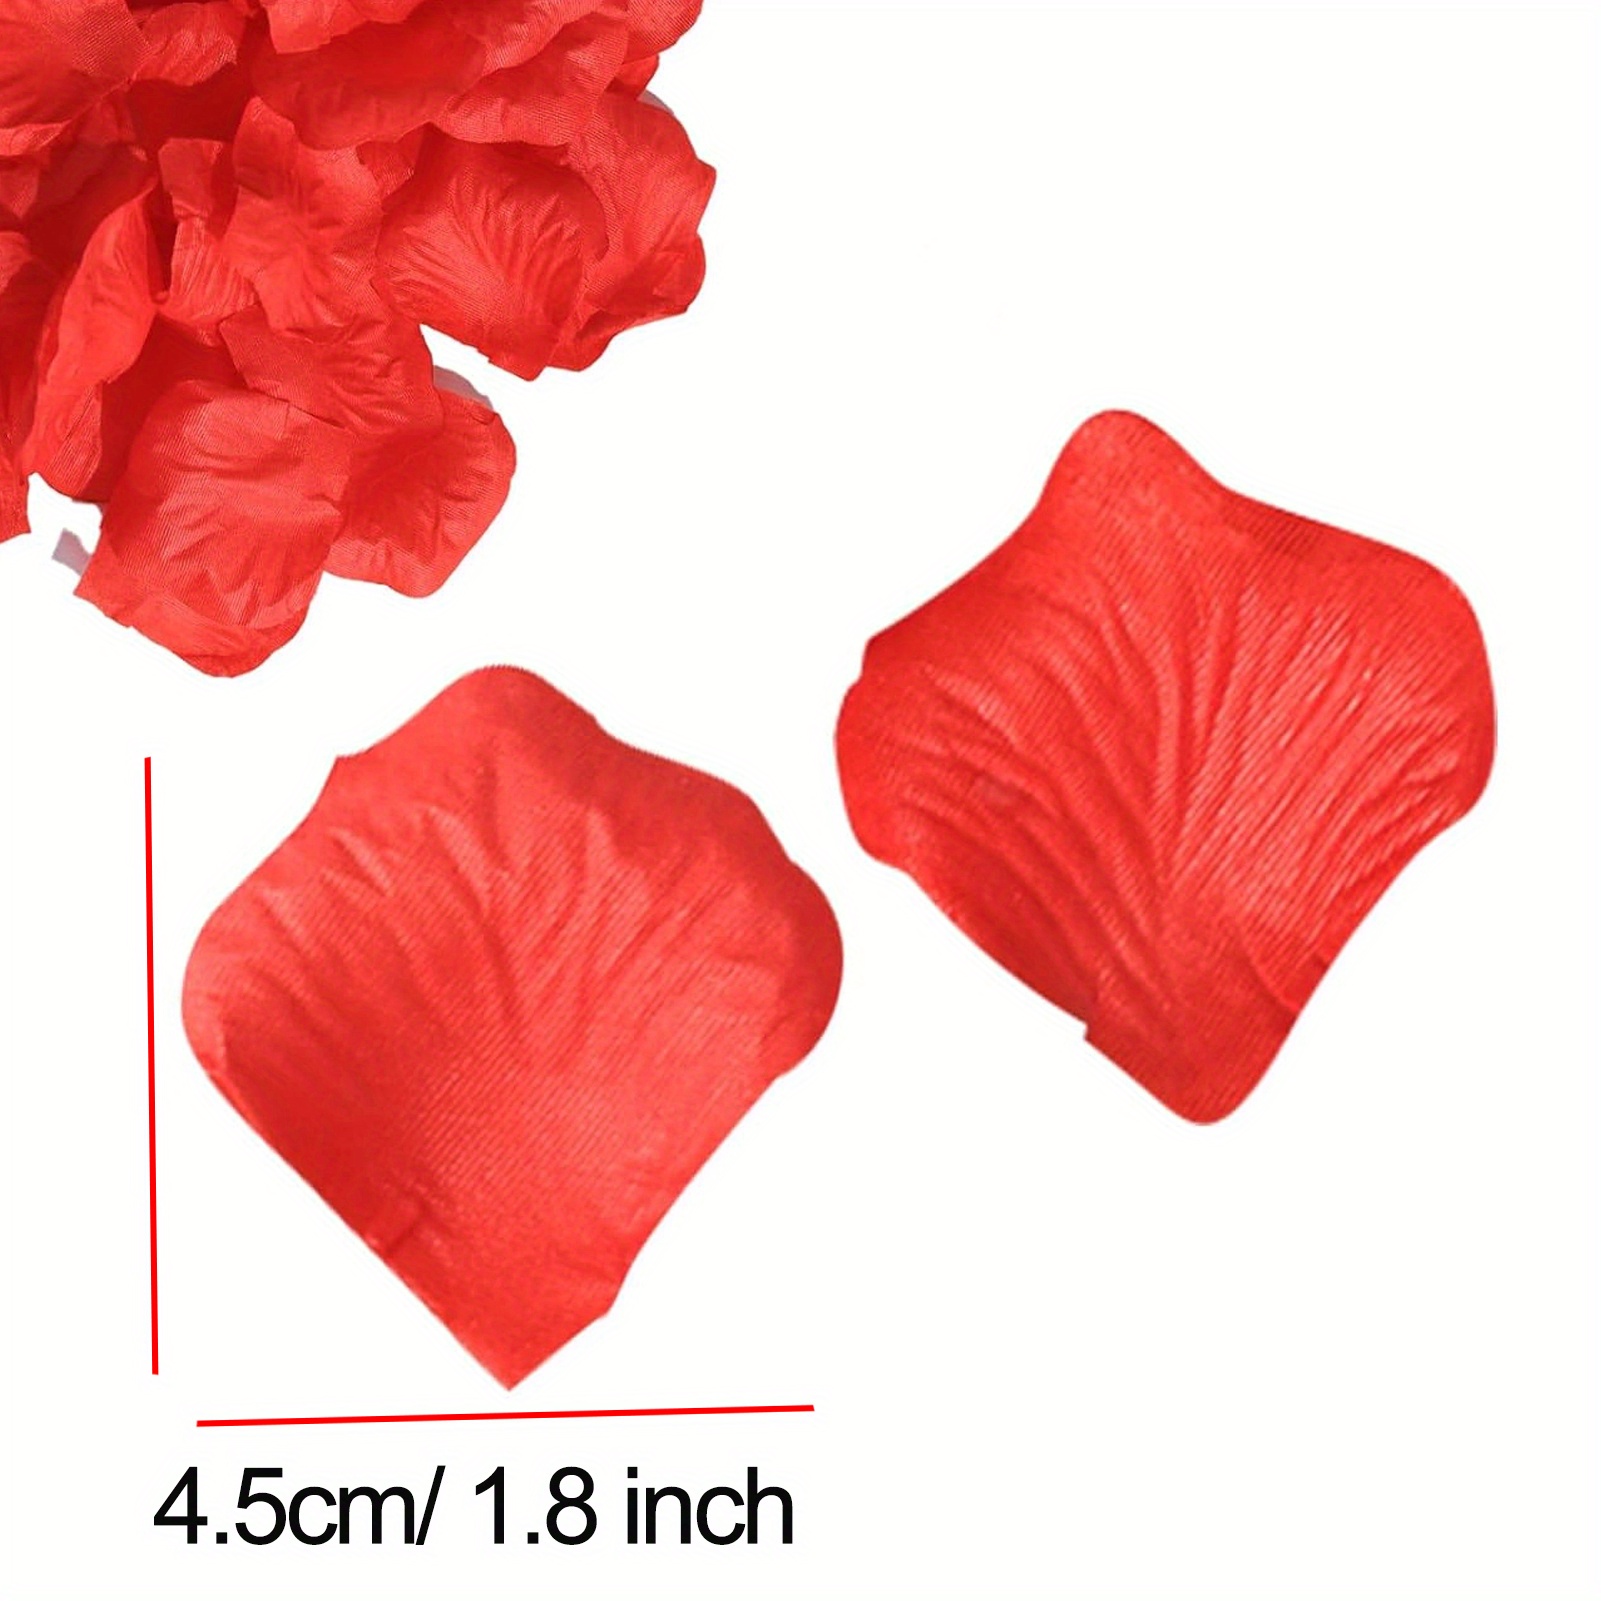 2CFun 3000 Pcs Dark Red Silk Rose Petals for Wedding, Romantic Night Party Decor Valentine's Day Hotel Home Party Flower Decoration